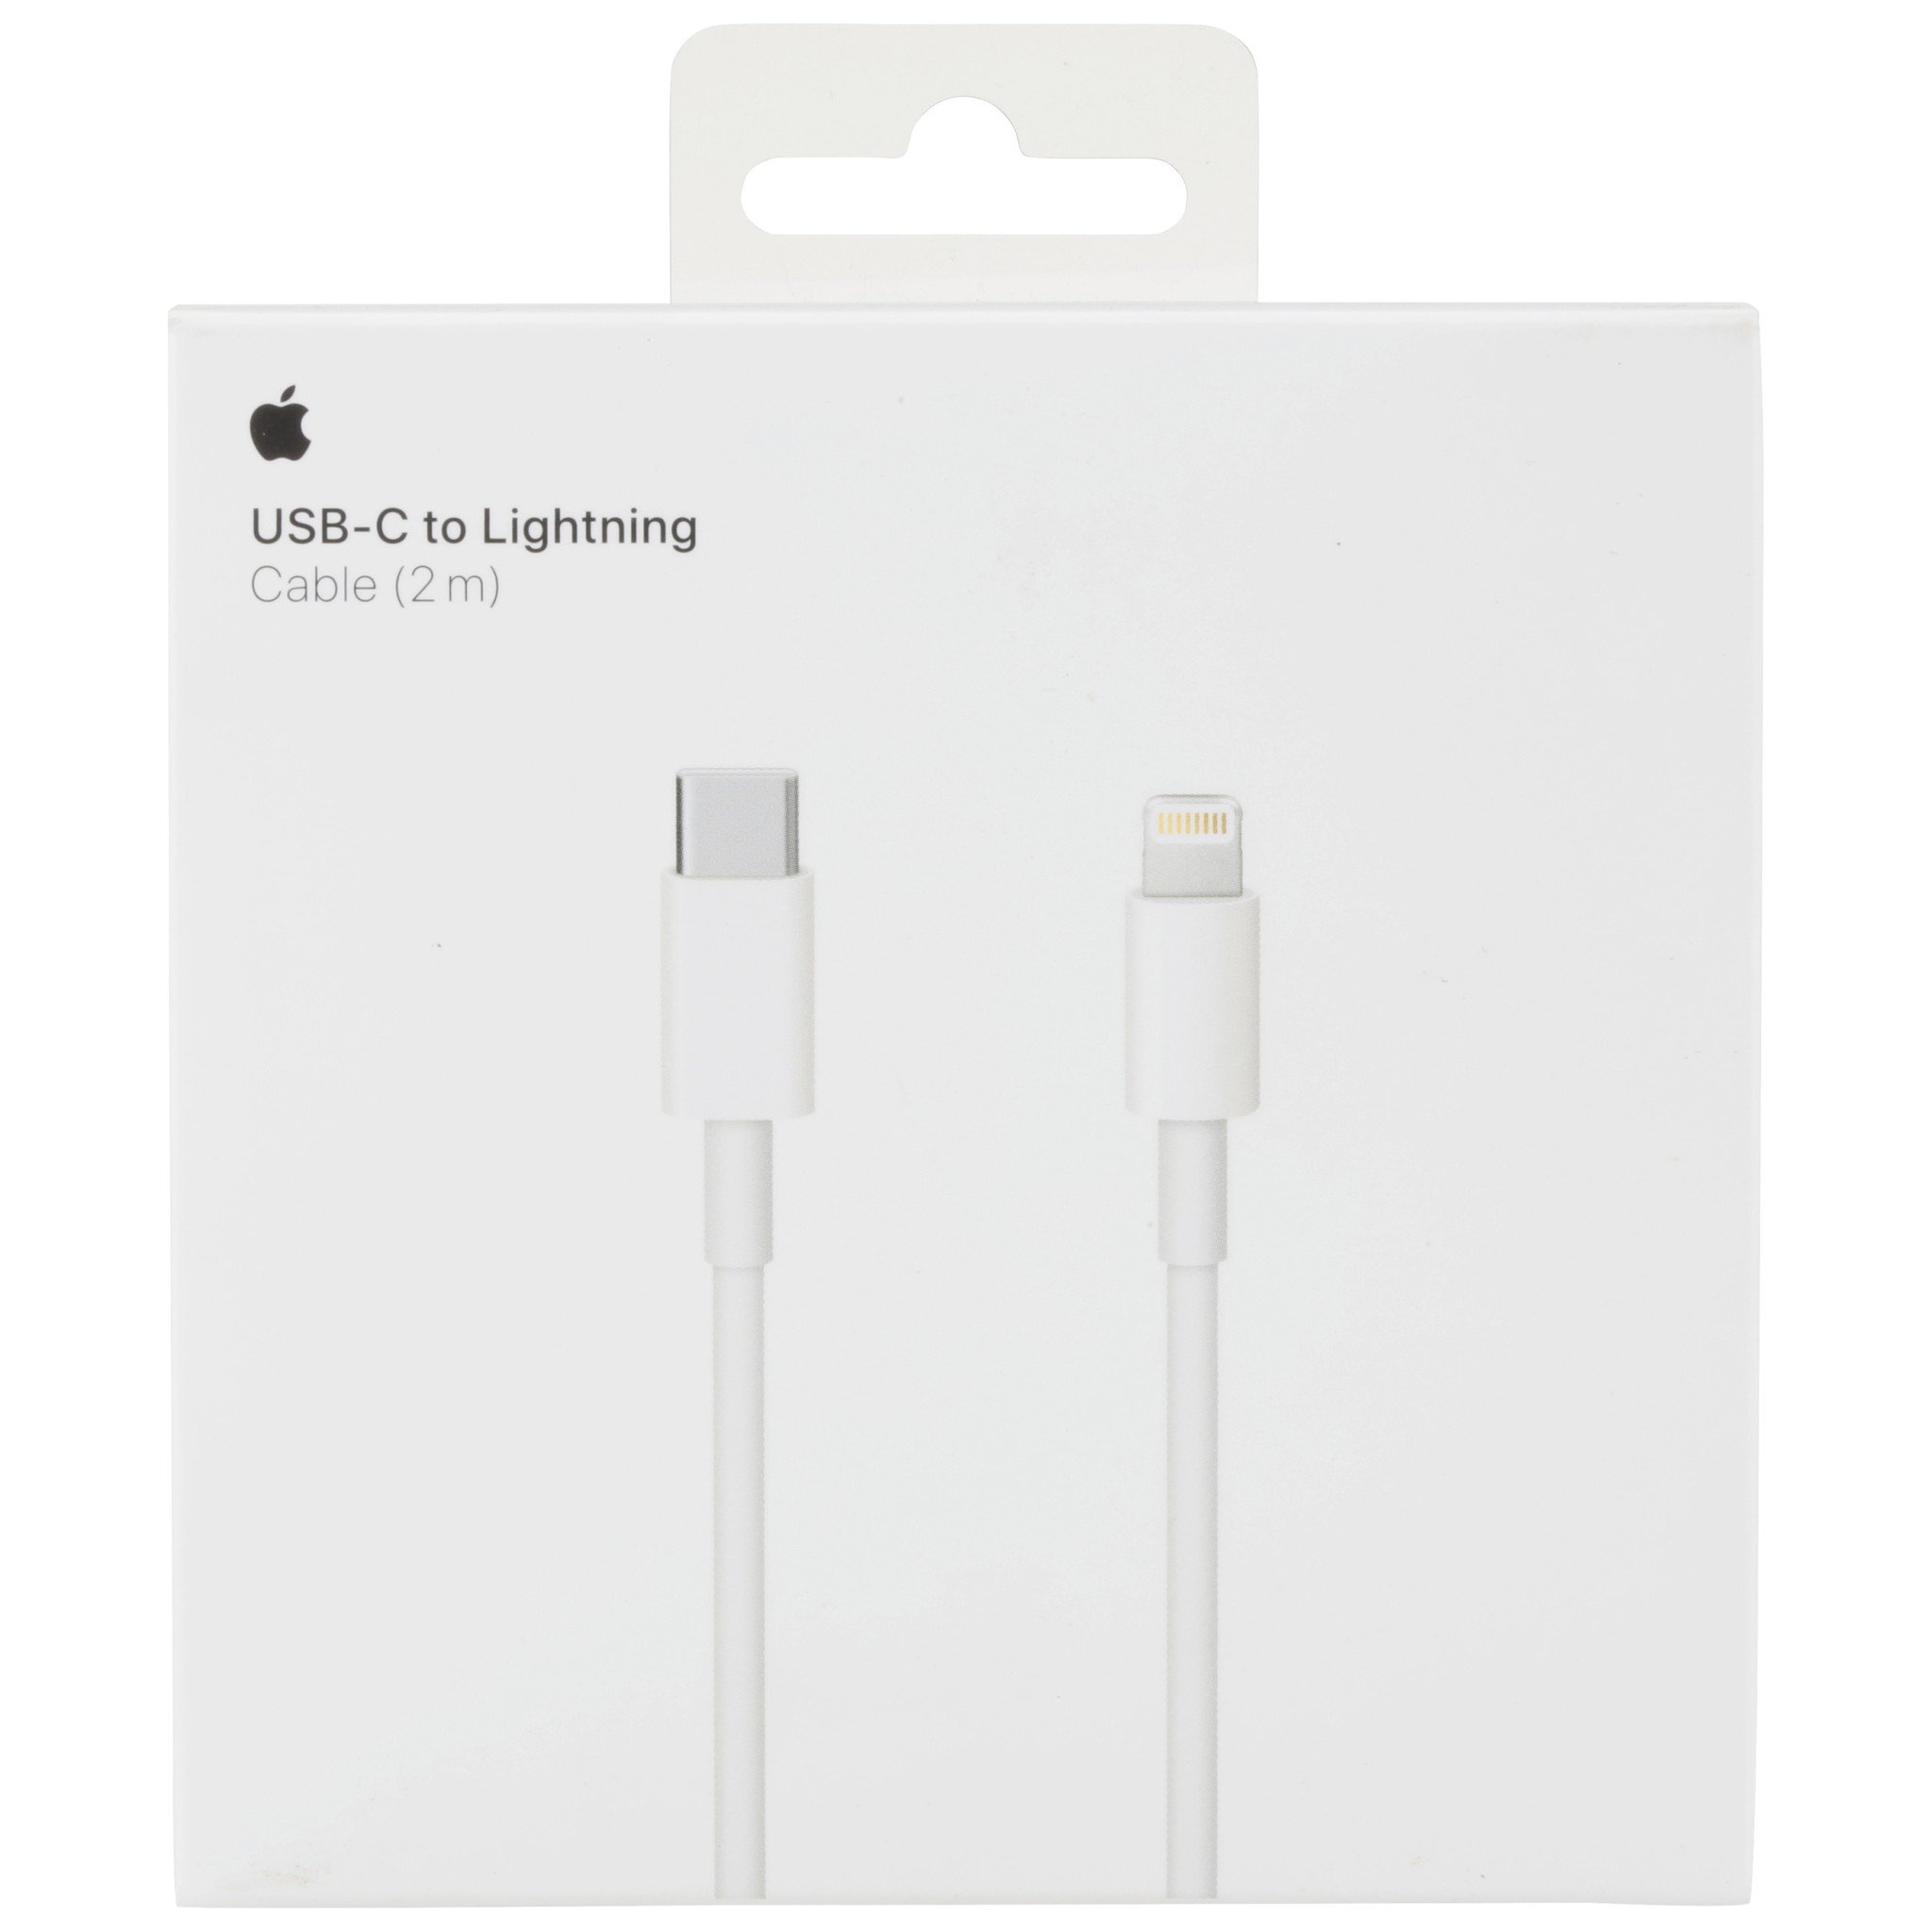 About the Apple USB-C to Lightning Cable - uni